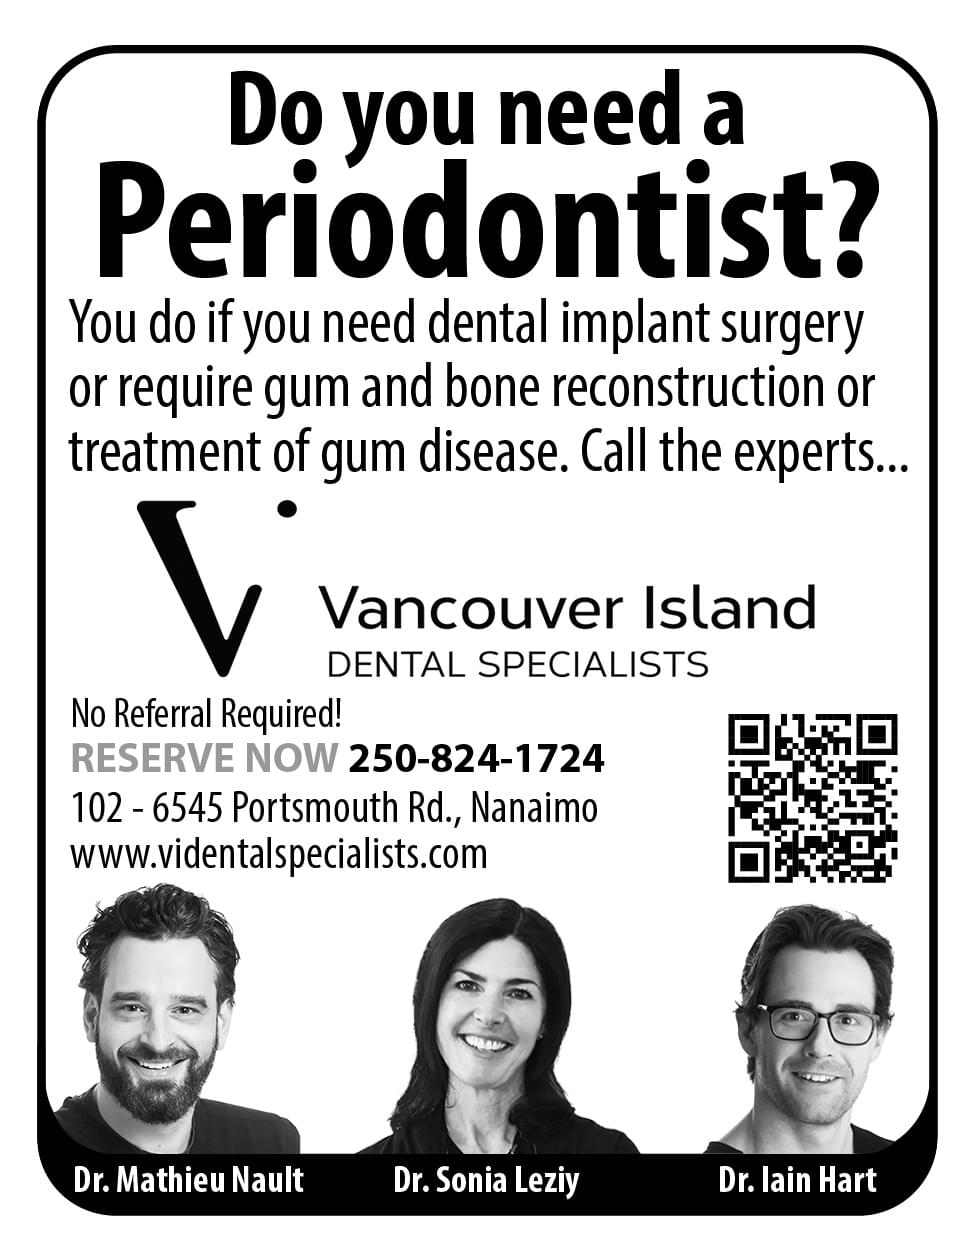 Vancouver Island Dental Specialists Ad in Coffee News